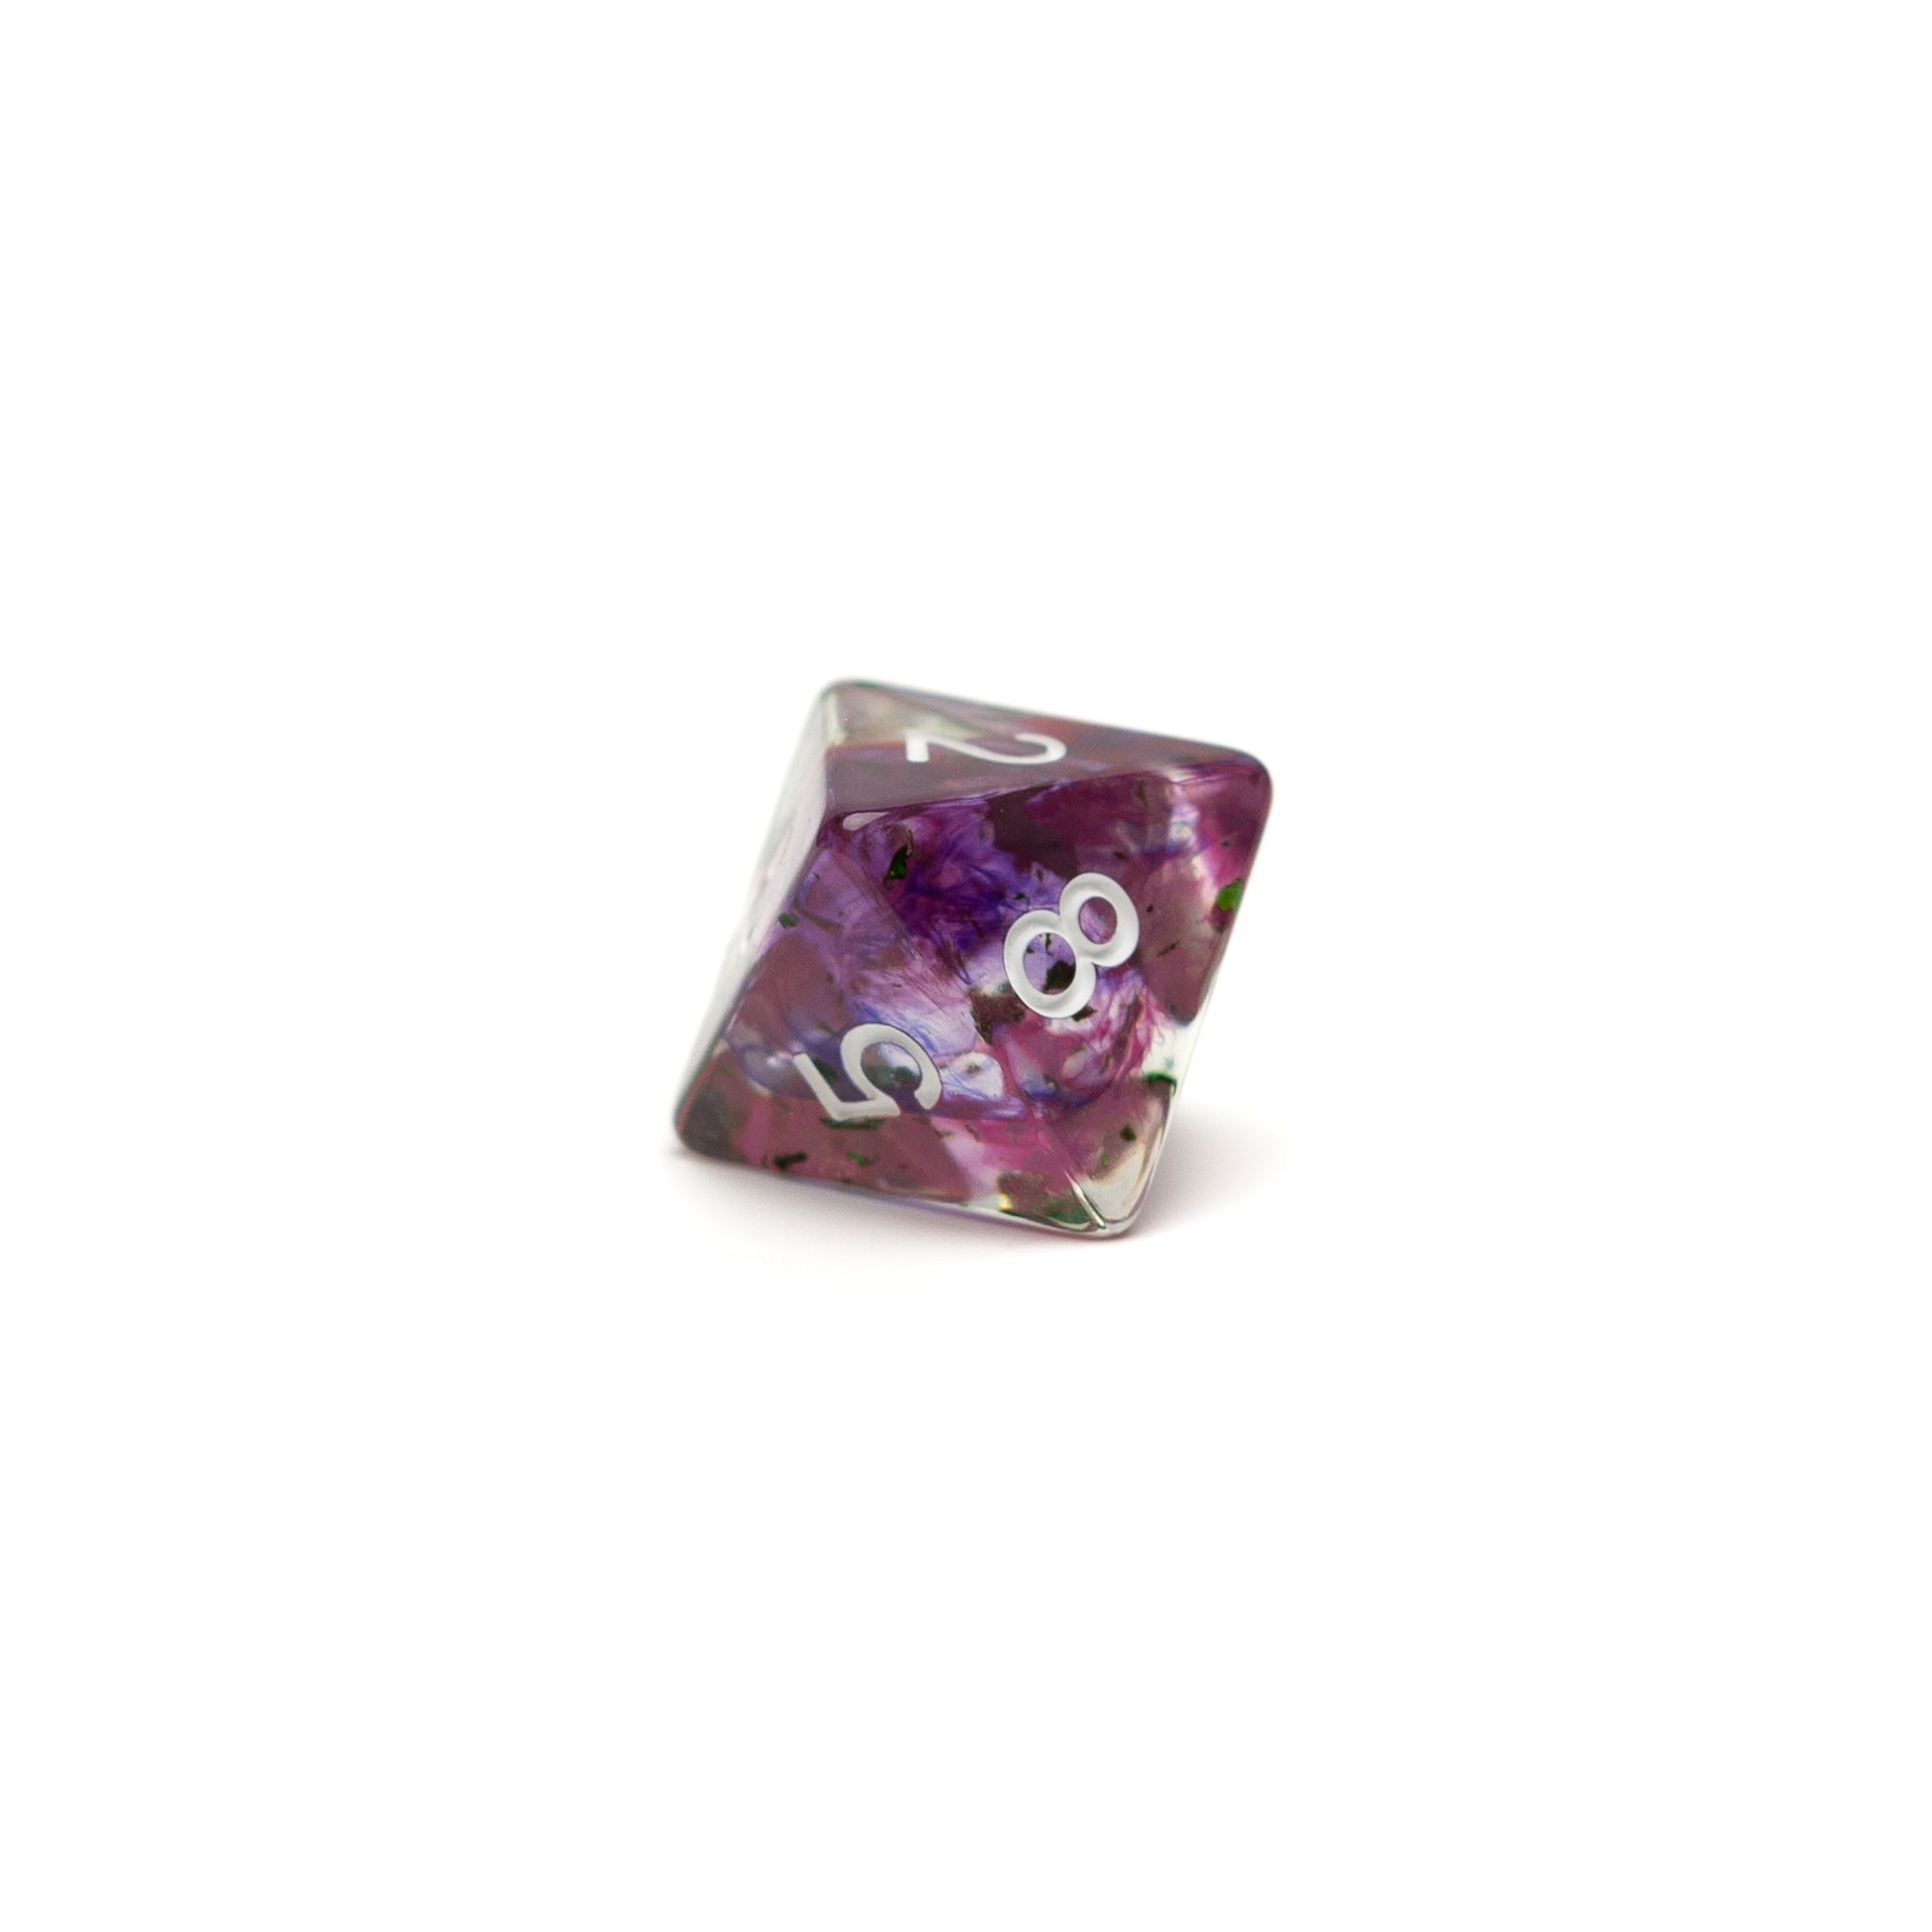 Roll Britannia Malrus and Milo Tosscobble Dungeons and Dragons D8 Dice with Swirling Purple and Green Glitter Aesthetic